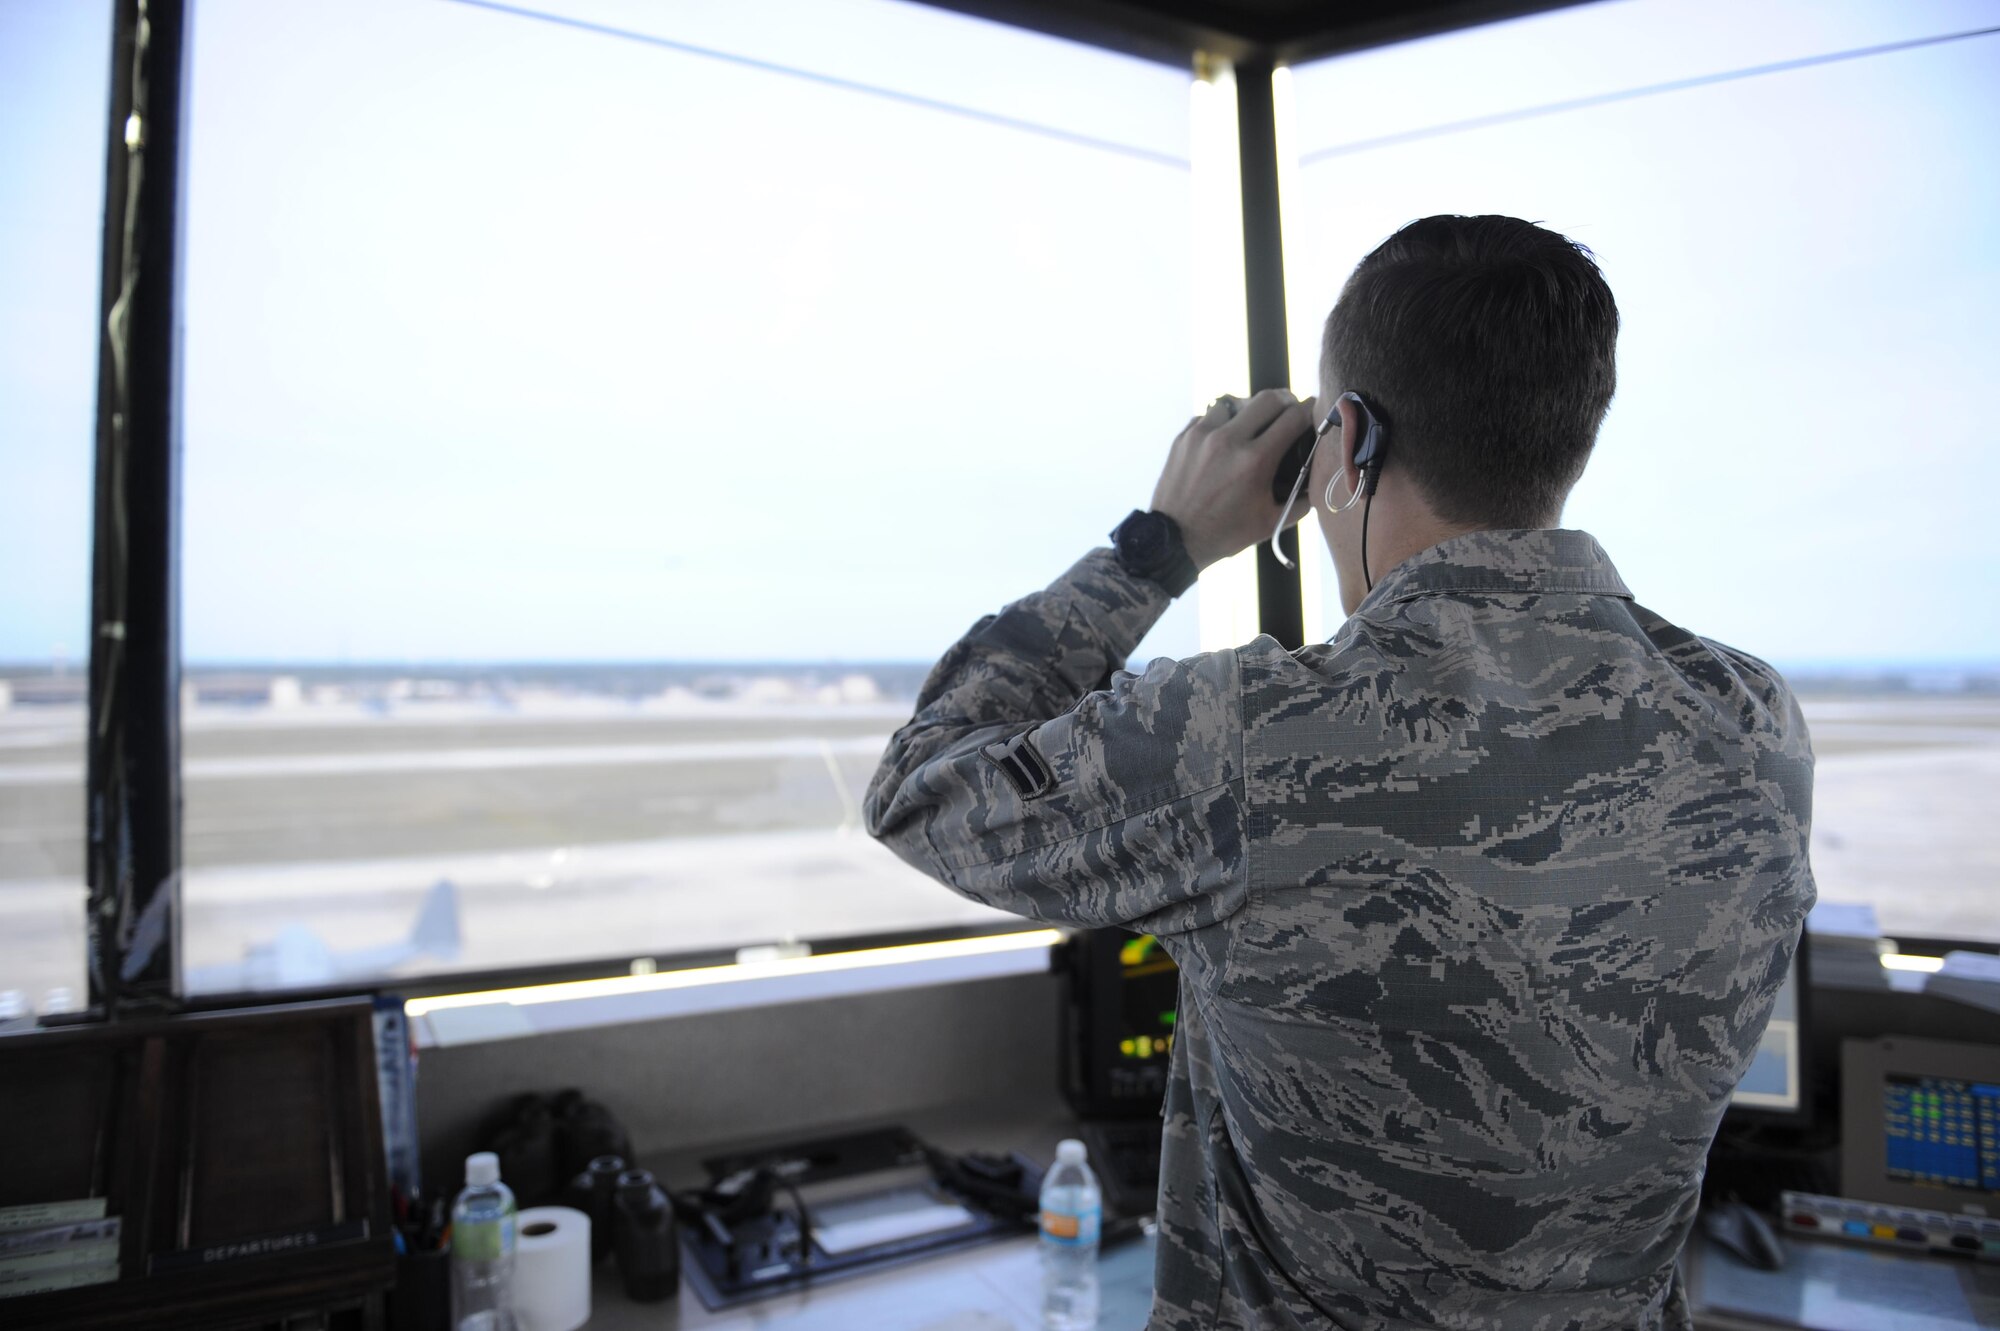 Airman 1st Class Tyler Haley, an air traffic control apprentice with the 1st Special Operations Support Squadron, monitors and communicates with an incoming pilot through a headset at Hulburt Field, Fla., May 3, 2017.  Air traffic controllers provide safe and organized flow of aircraft on the flight line and in the air. (U.S. Air Force photo by Airman 1st Class Isaac O. Guest IV)